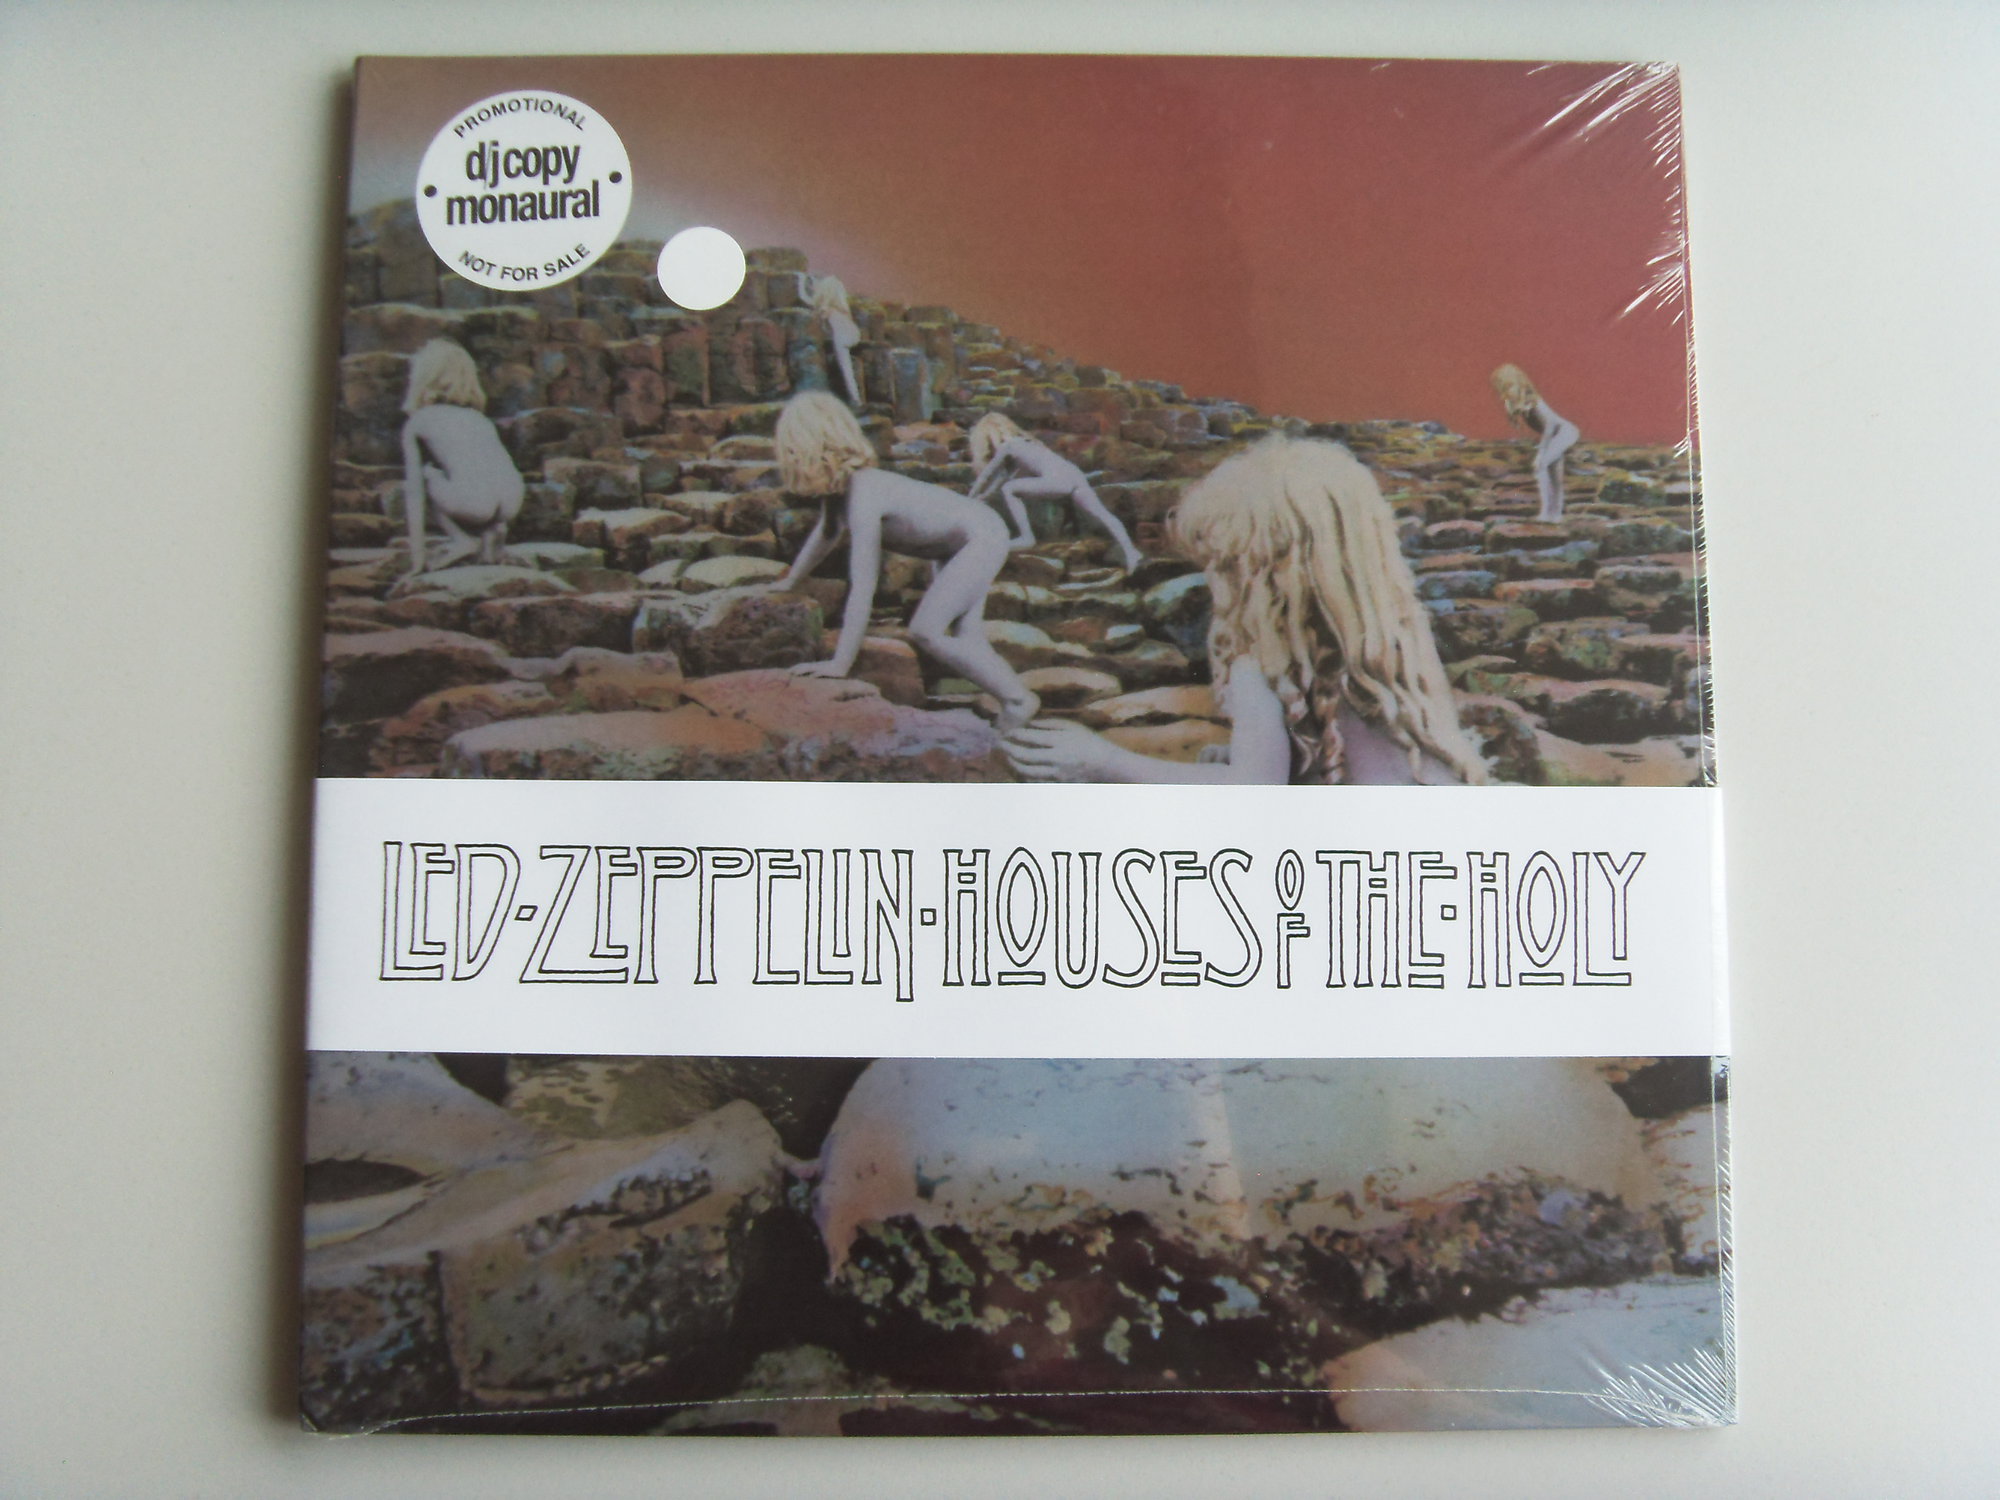 LED ZEPPELIN Houses of the holy d/j copy monaural